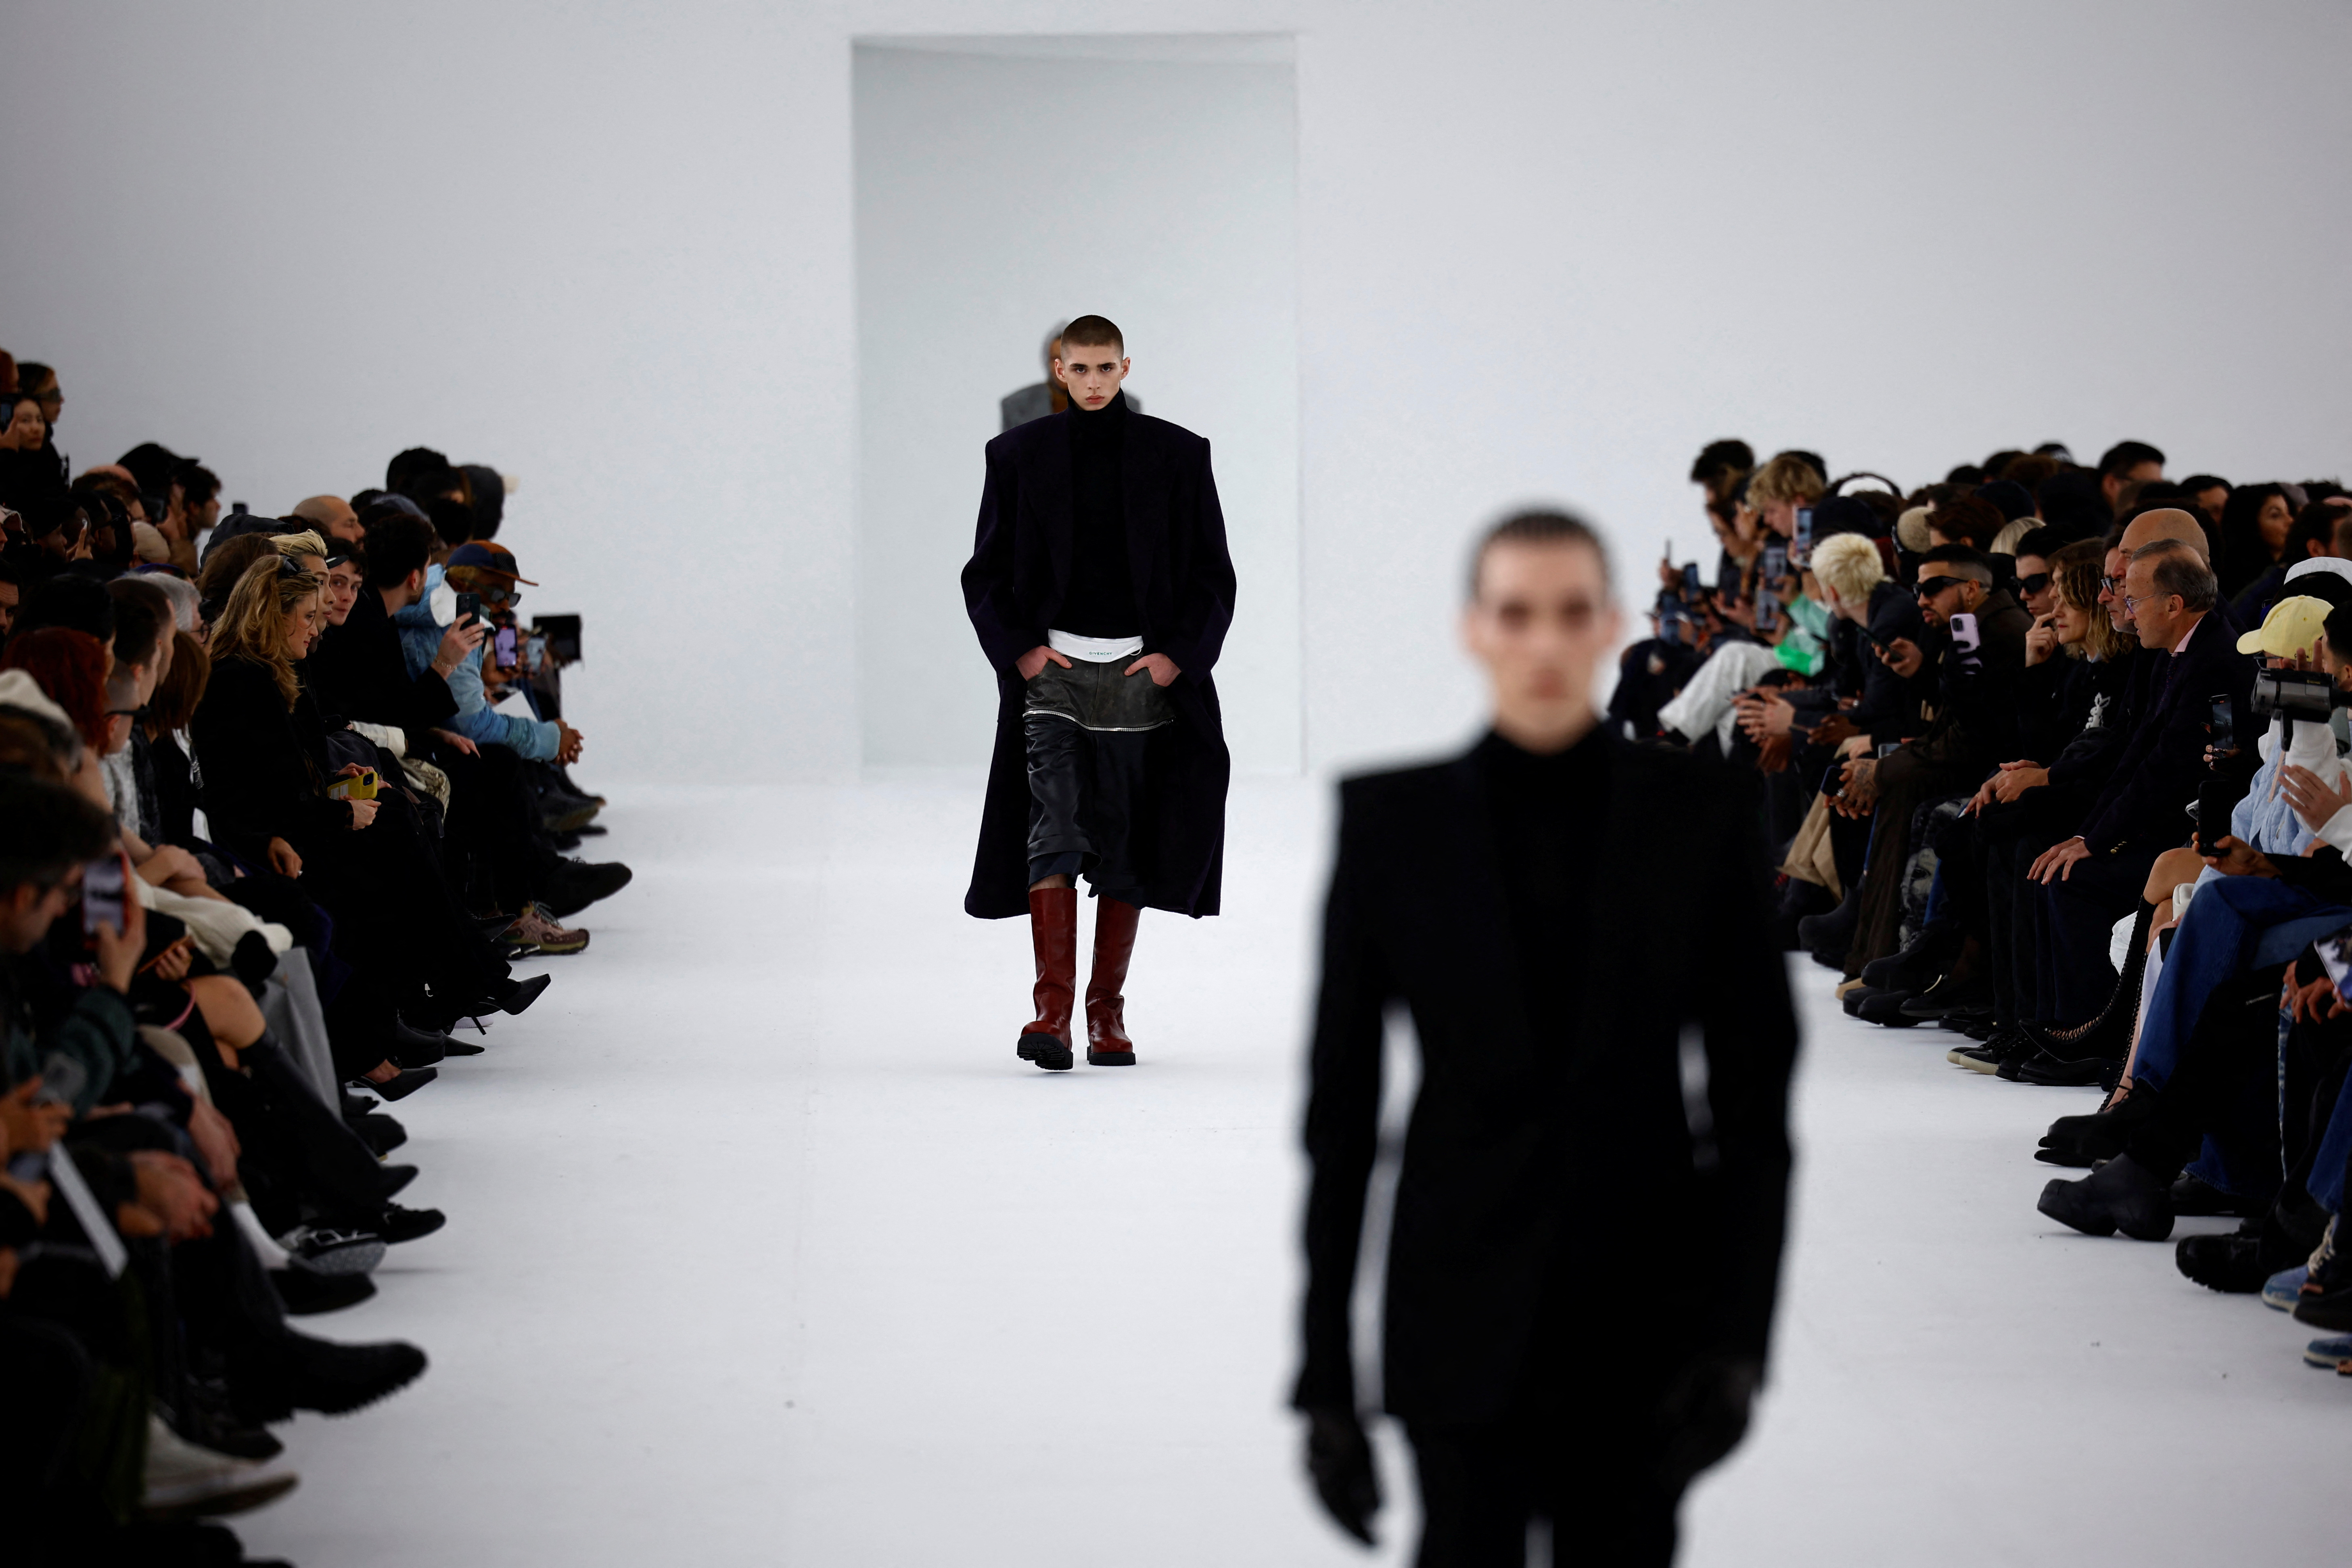 Taeyang is the Face of Givenchy Fall Winter 2023 Collection